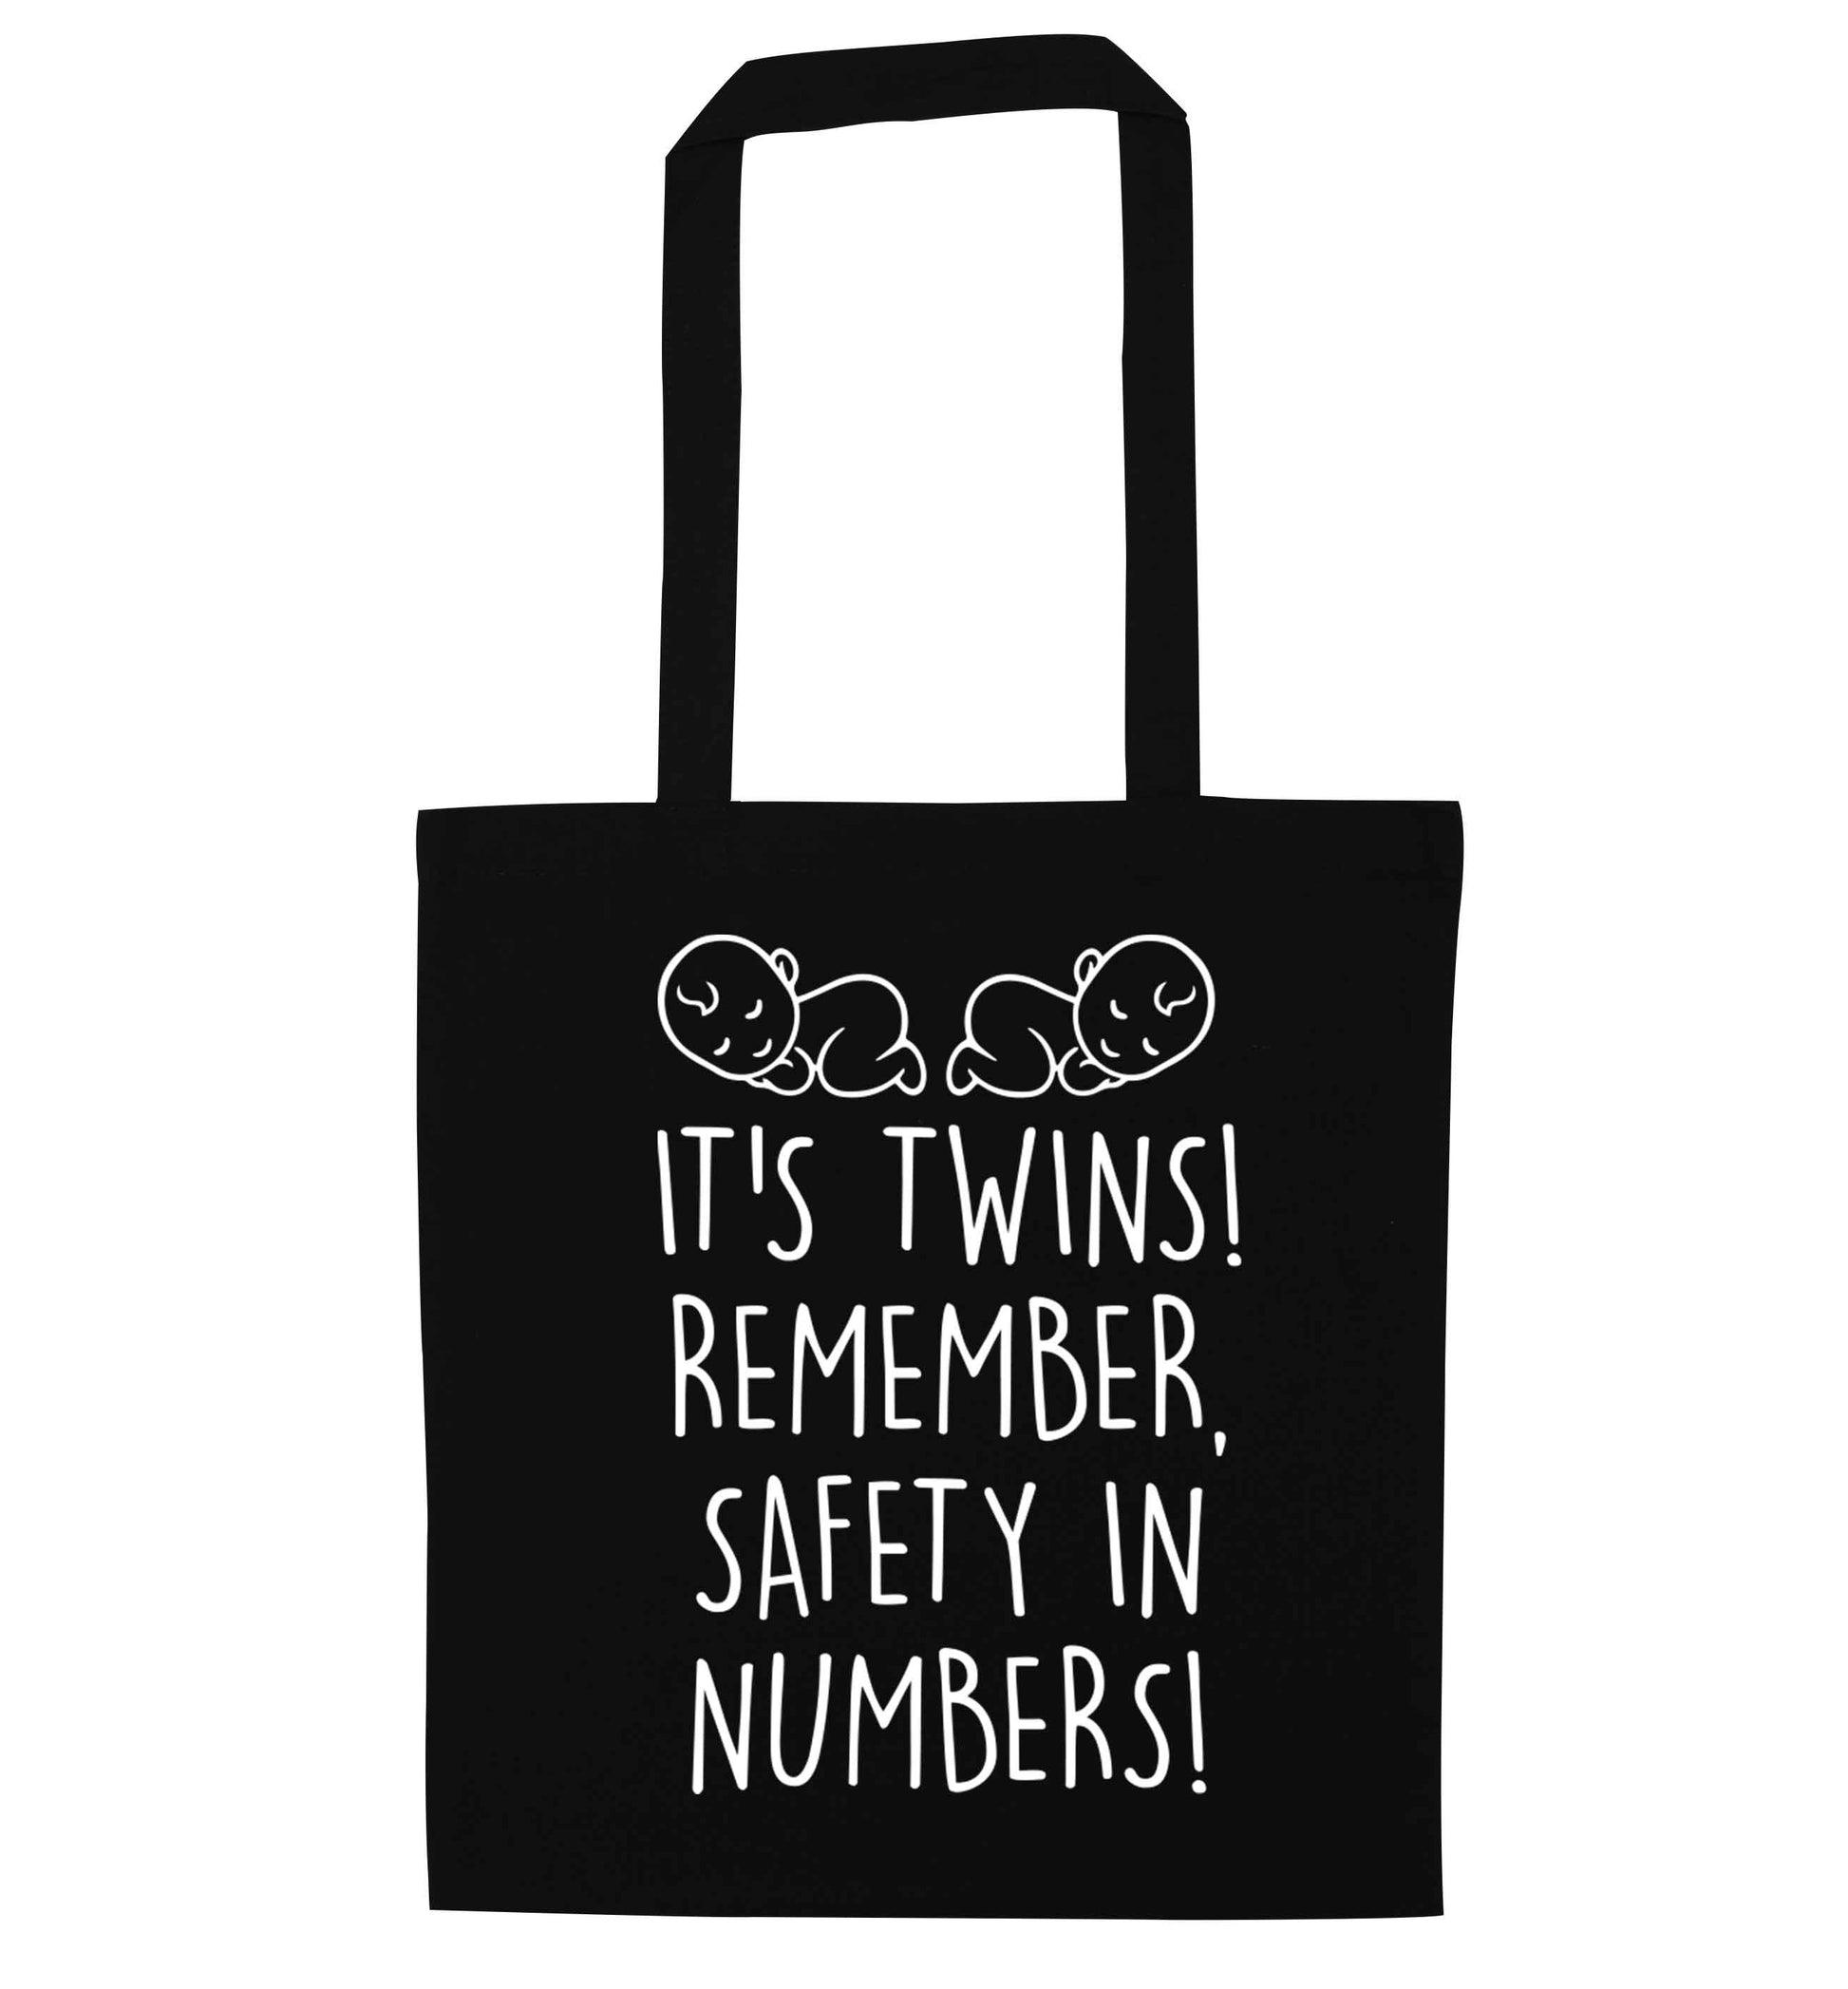 It's twins! Remember safety in numbers! black tote bag